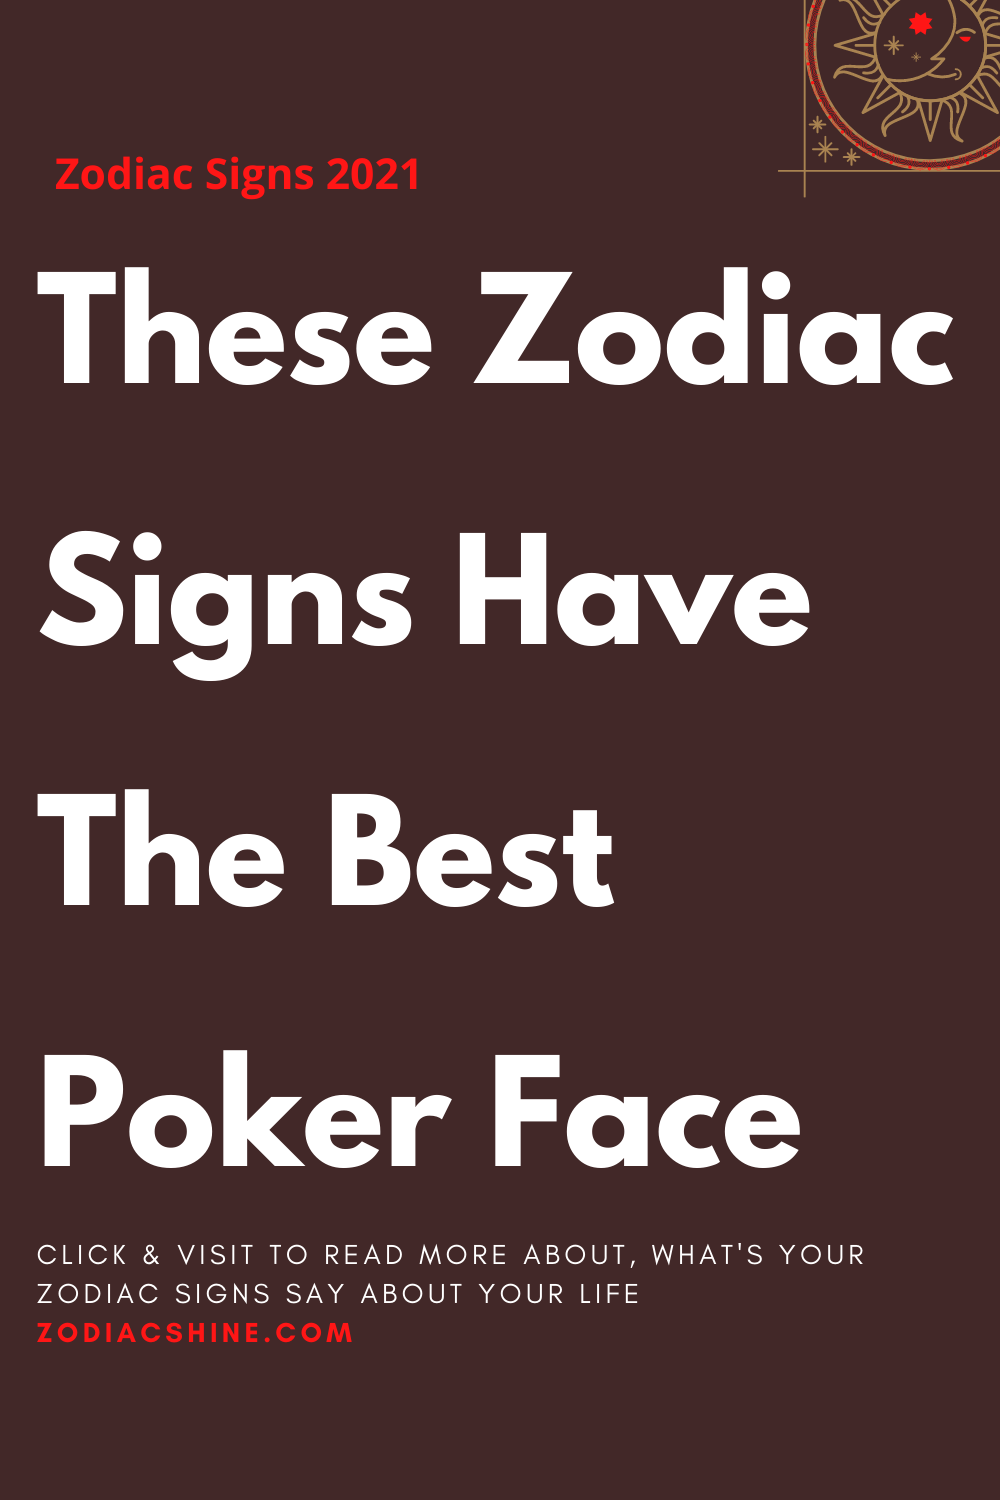 These Zodiac Signs Have The Best Poker Face